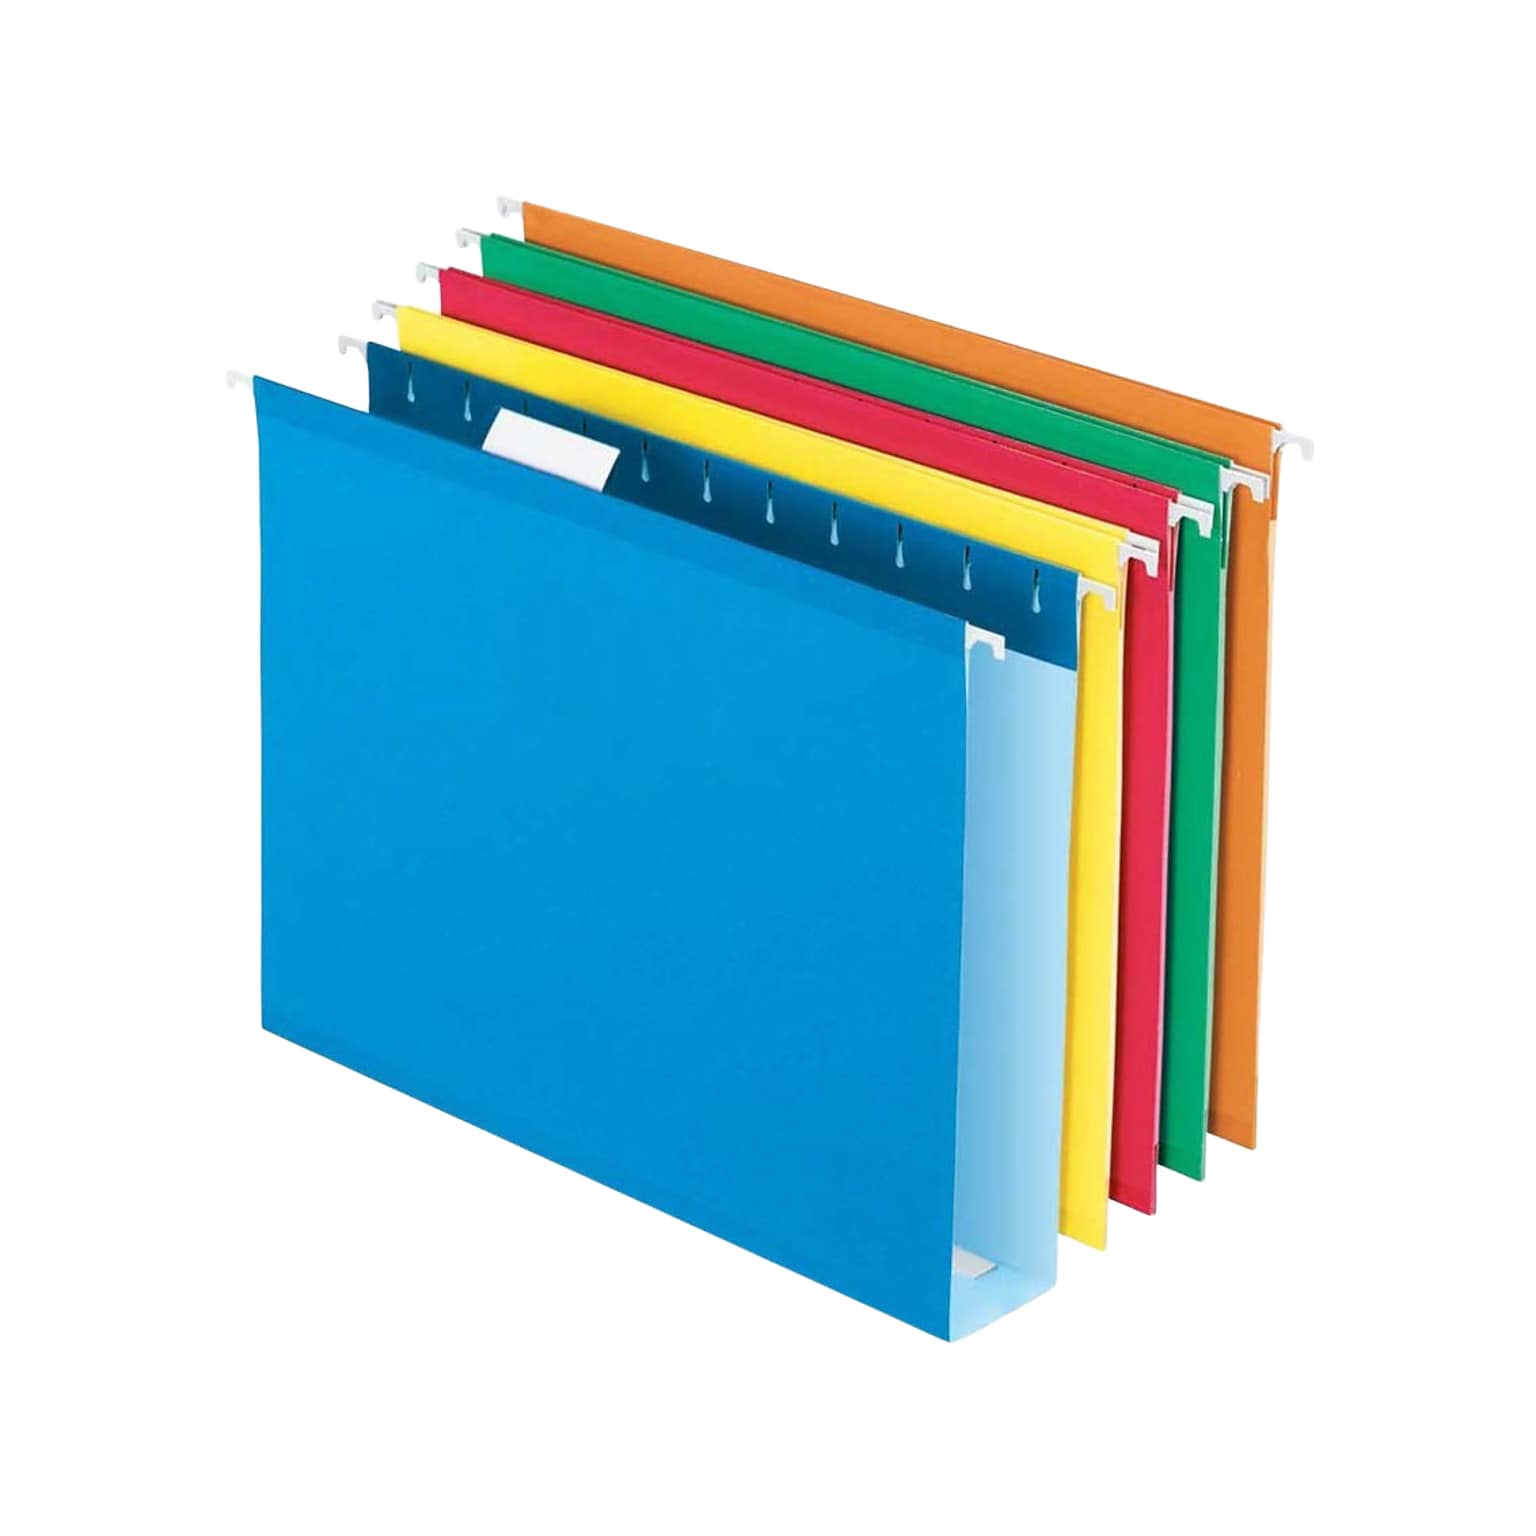 Pendaflex Reinforced Recycled Hanging File Folders, 1/5 Cut, Legal Size, Assorted Colors, 25/Box (PFX 5143x2 ASST)